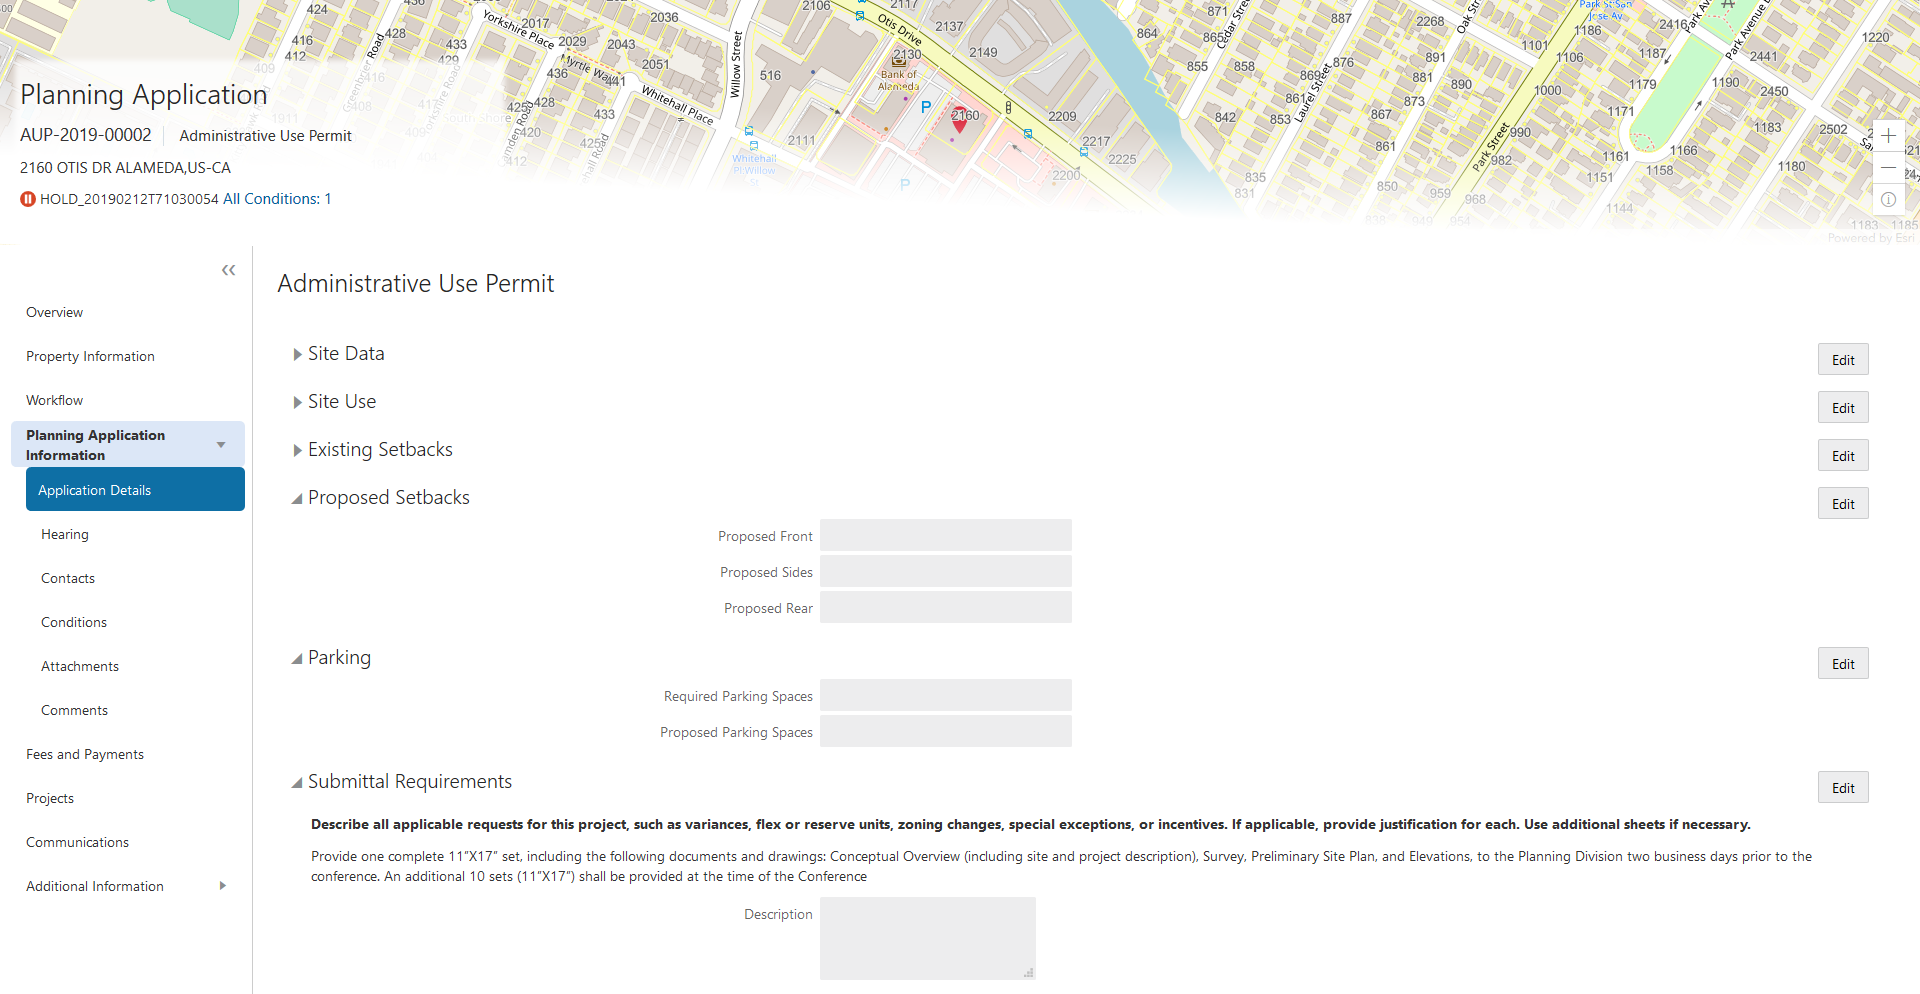 Planning Application - Application Details page